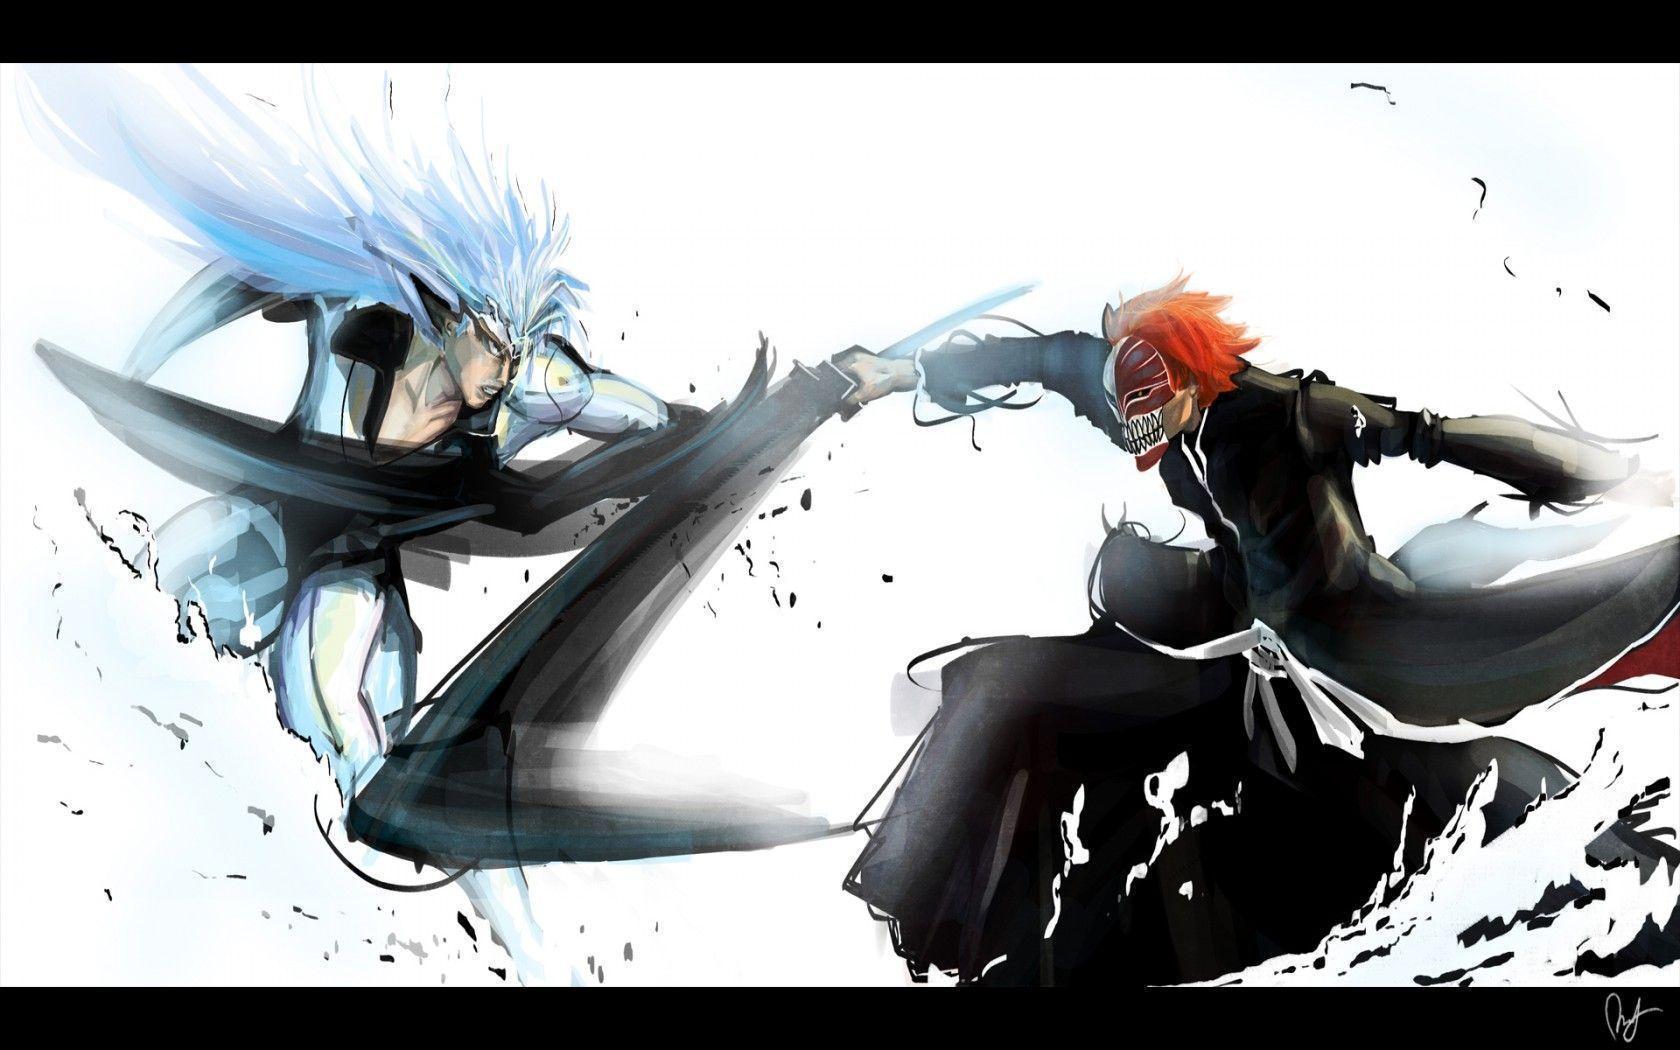 Awesome Bleach Wallpaper 92 of 167. phombo